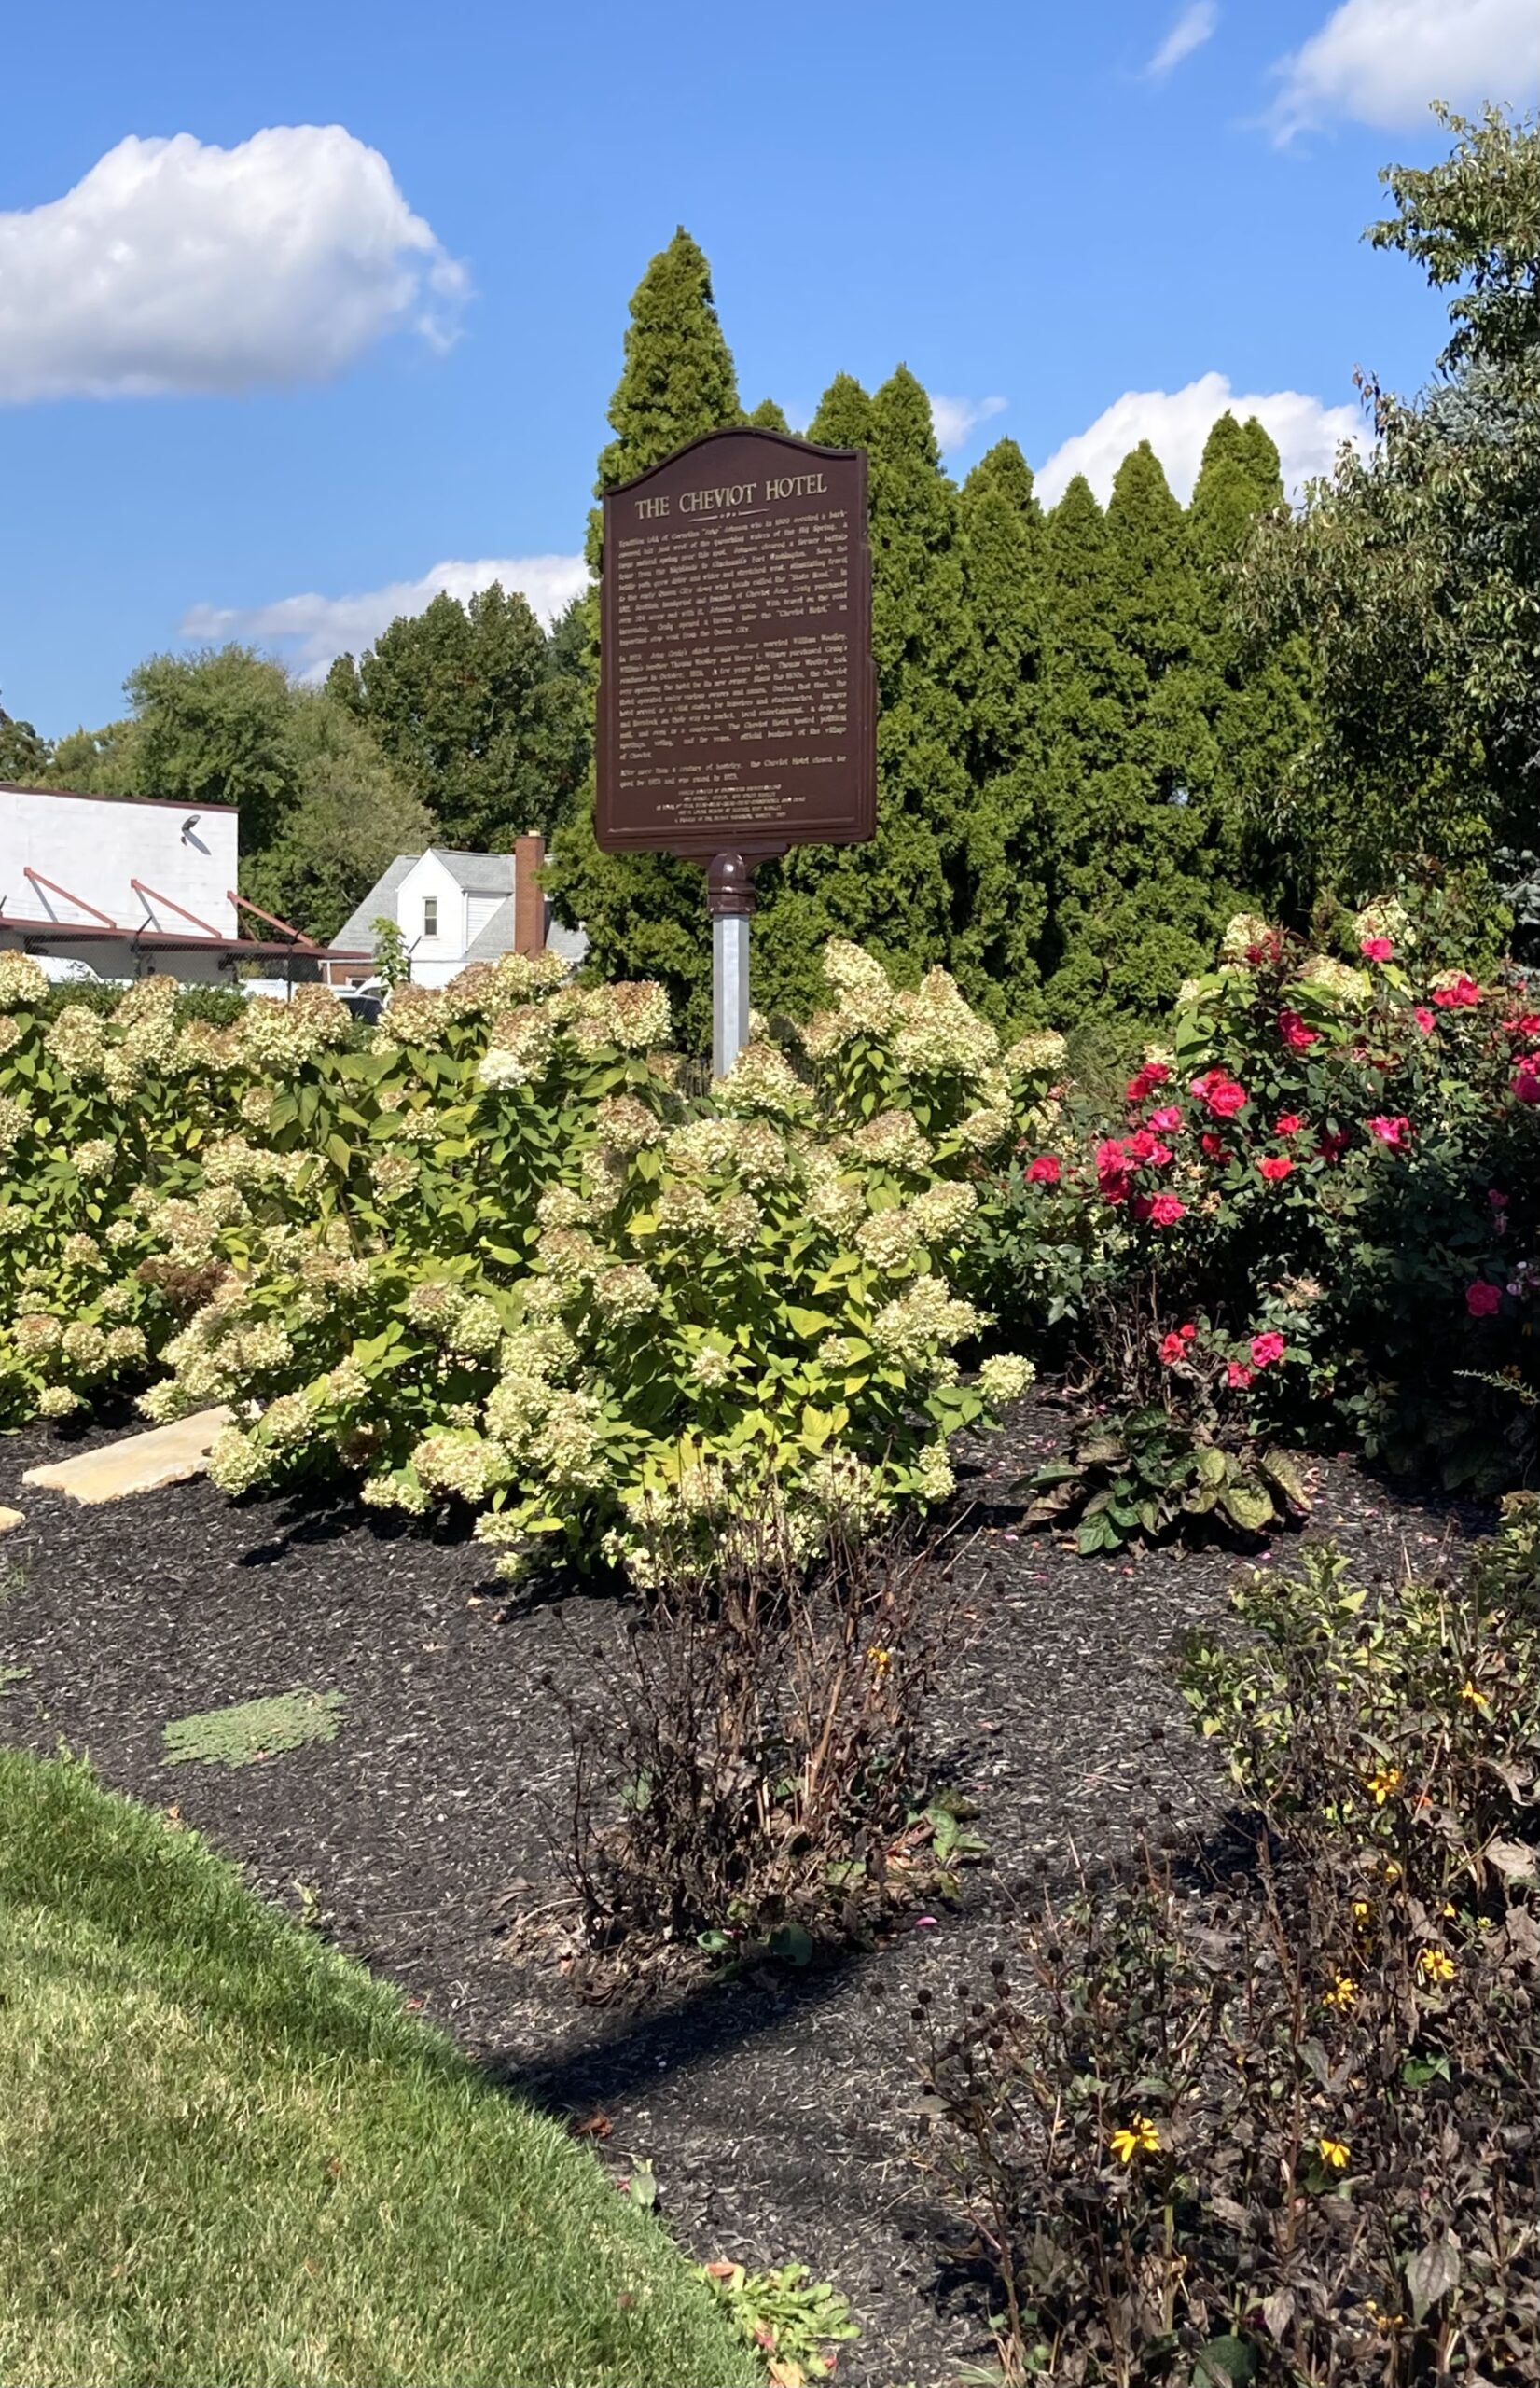 A brown sign surrounded by flower bushes.